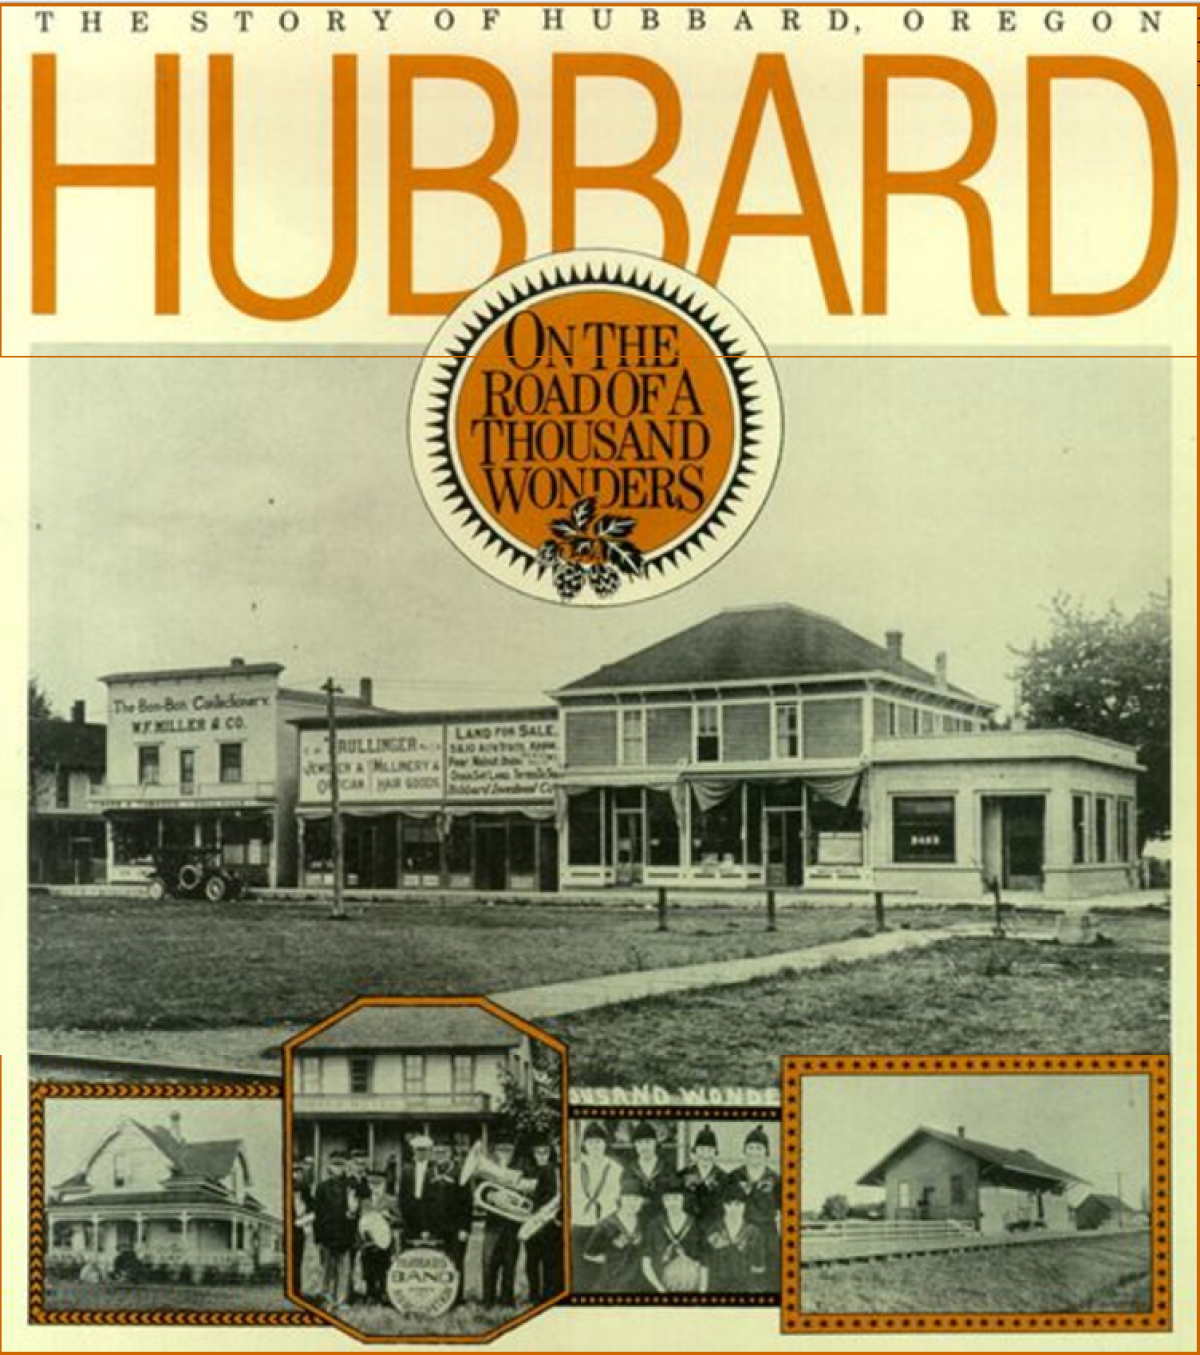 The Story of Hubbard book cover